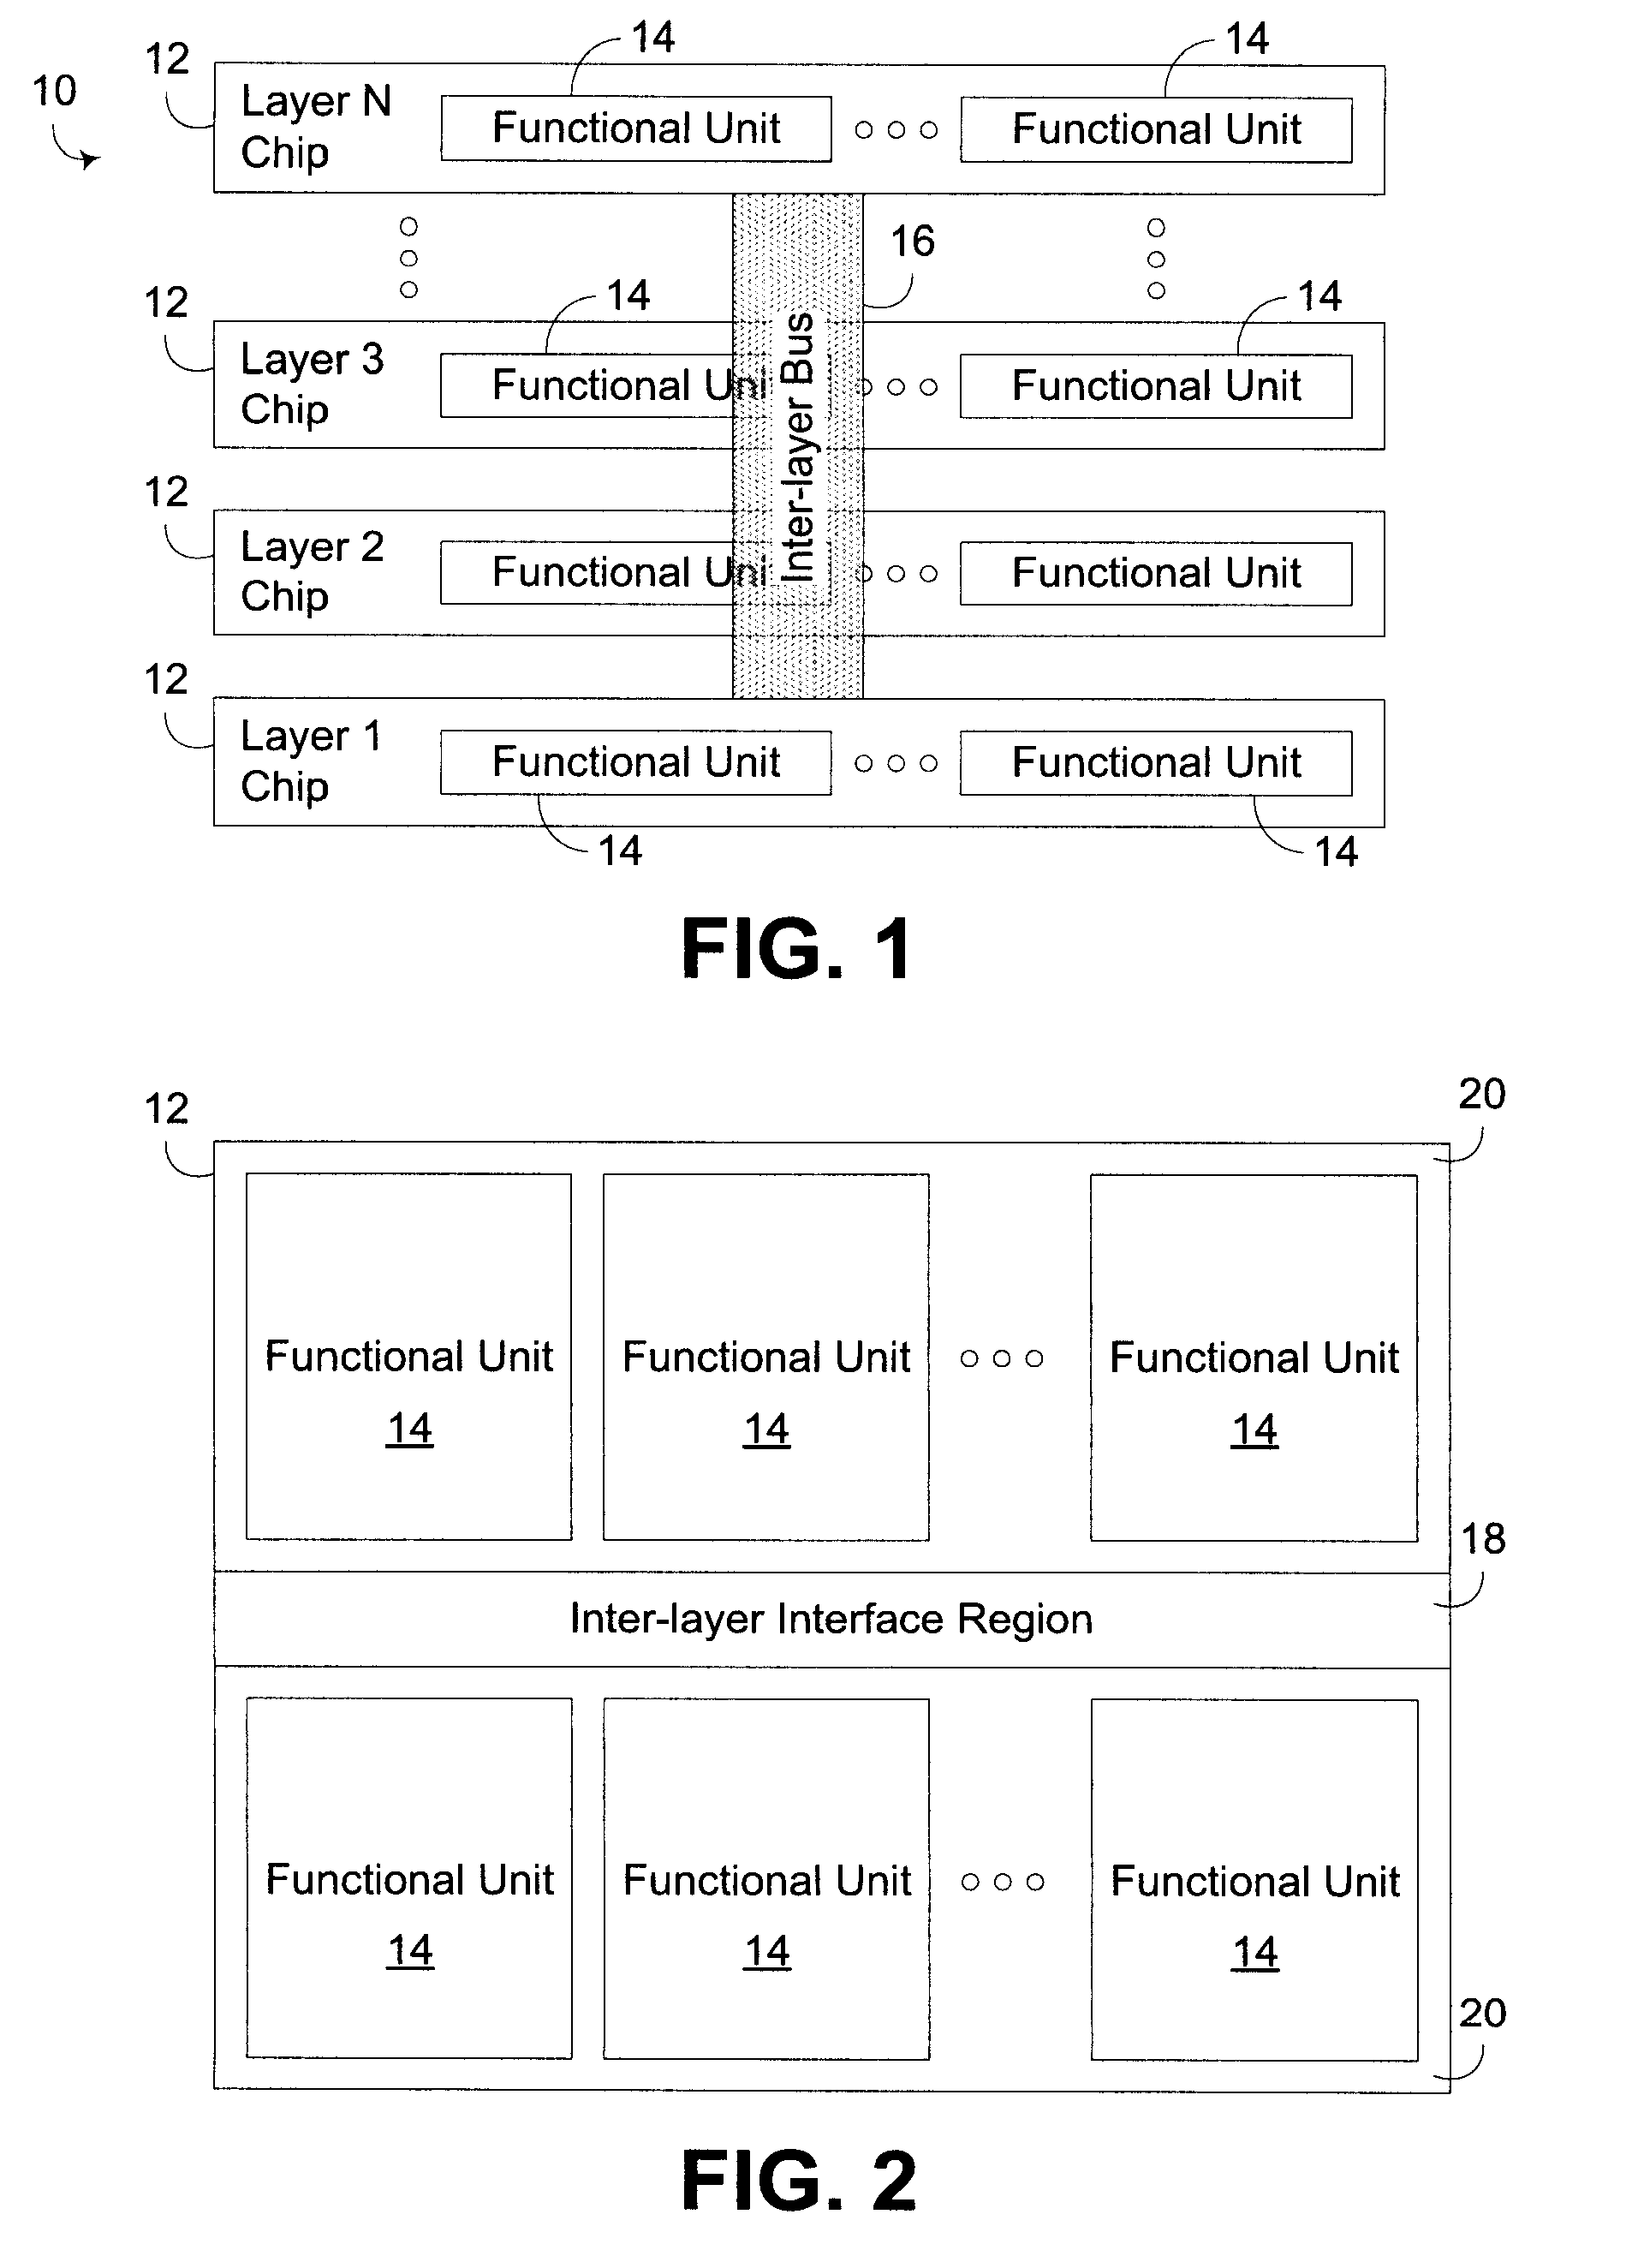 Universal Inter-Layer Interconnect for Multi-Layer Semiconductor Stacks